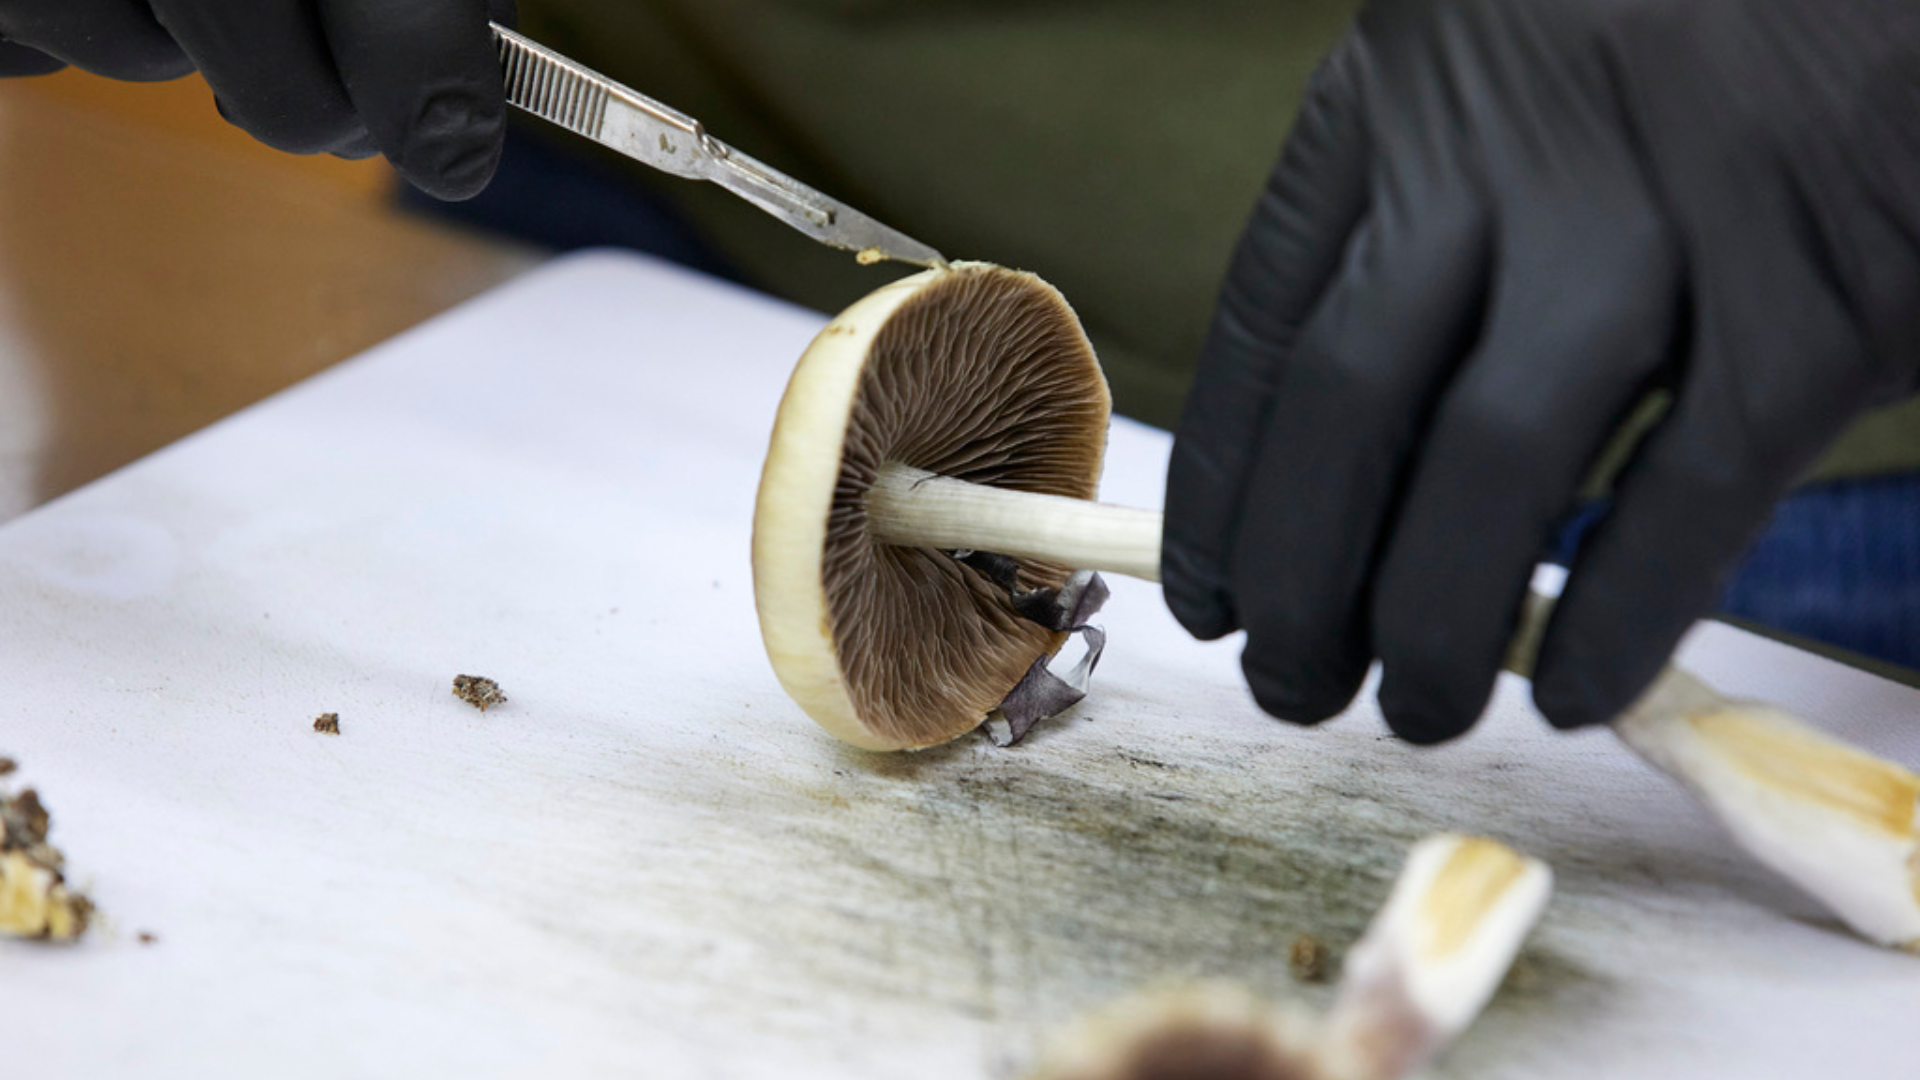 Federal court case could decide if terminal patients may use psilocybin